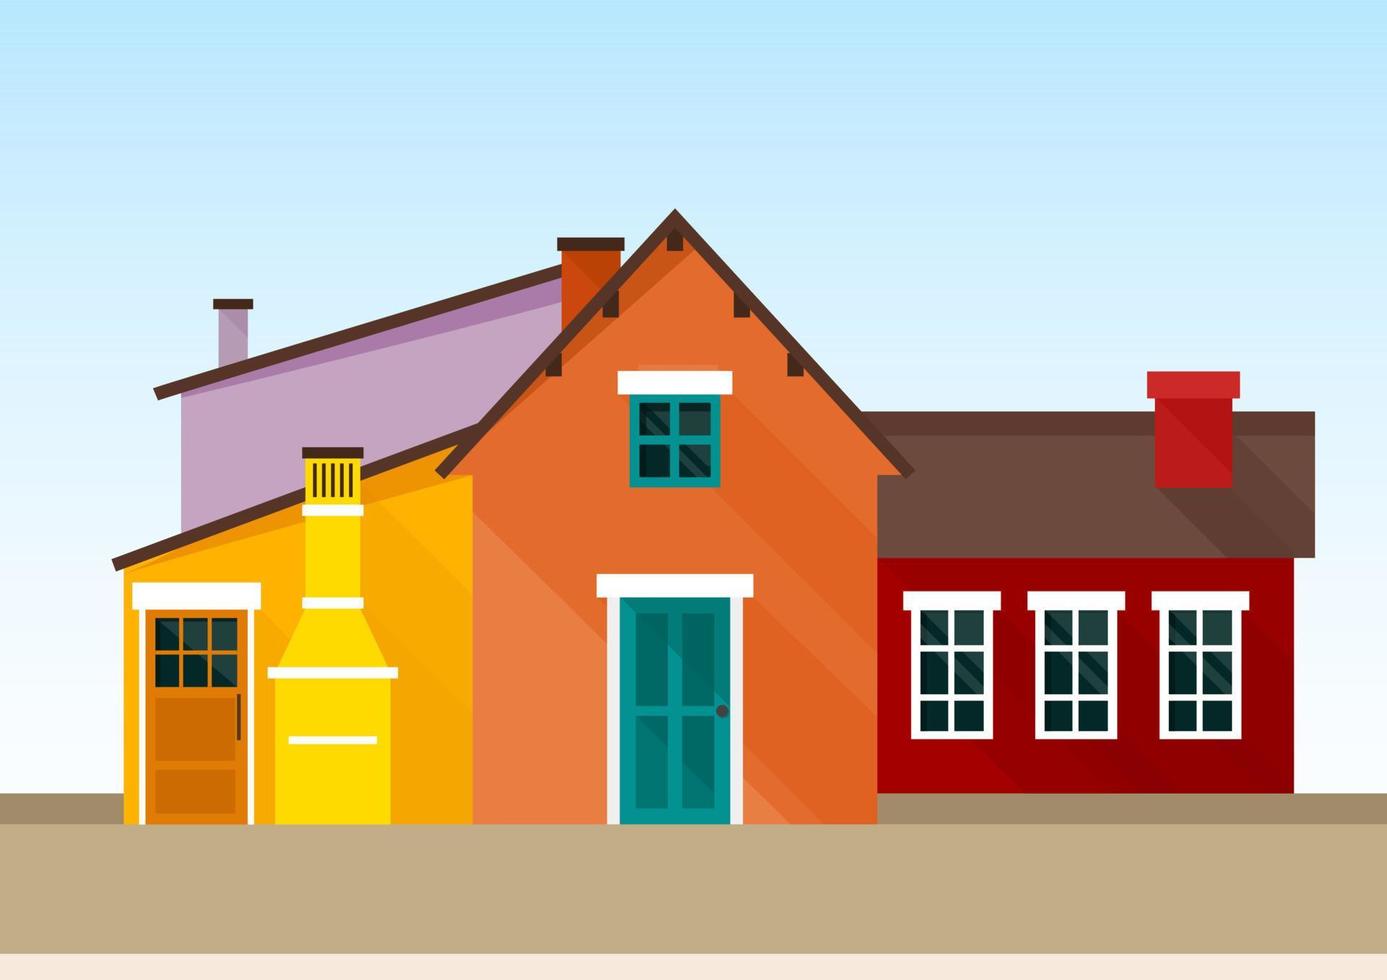 Several bright yellow, red and purple Scandinavian style houses vector